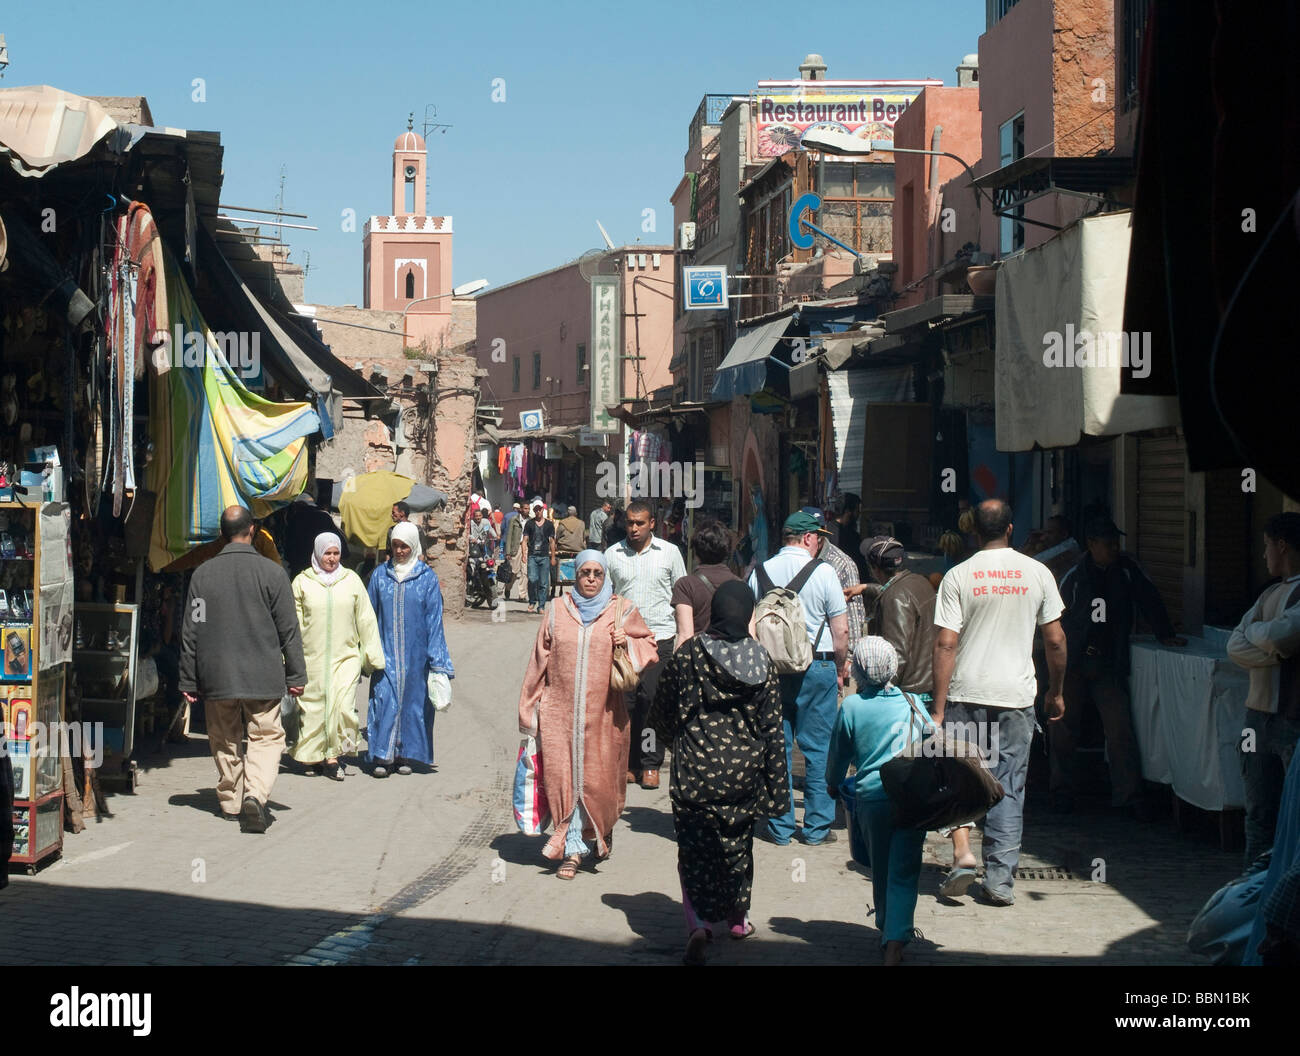 Street scene in the old city, the Medina, Marrakech, Morocco, Africa Stock Photo